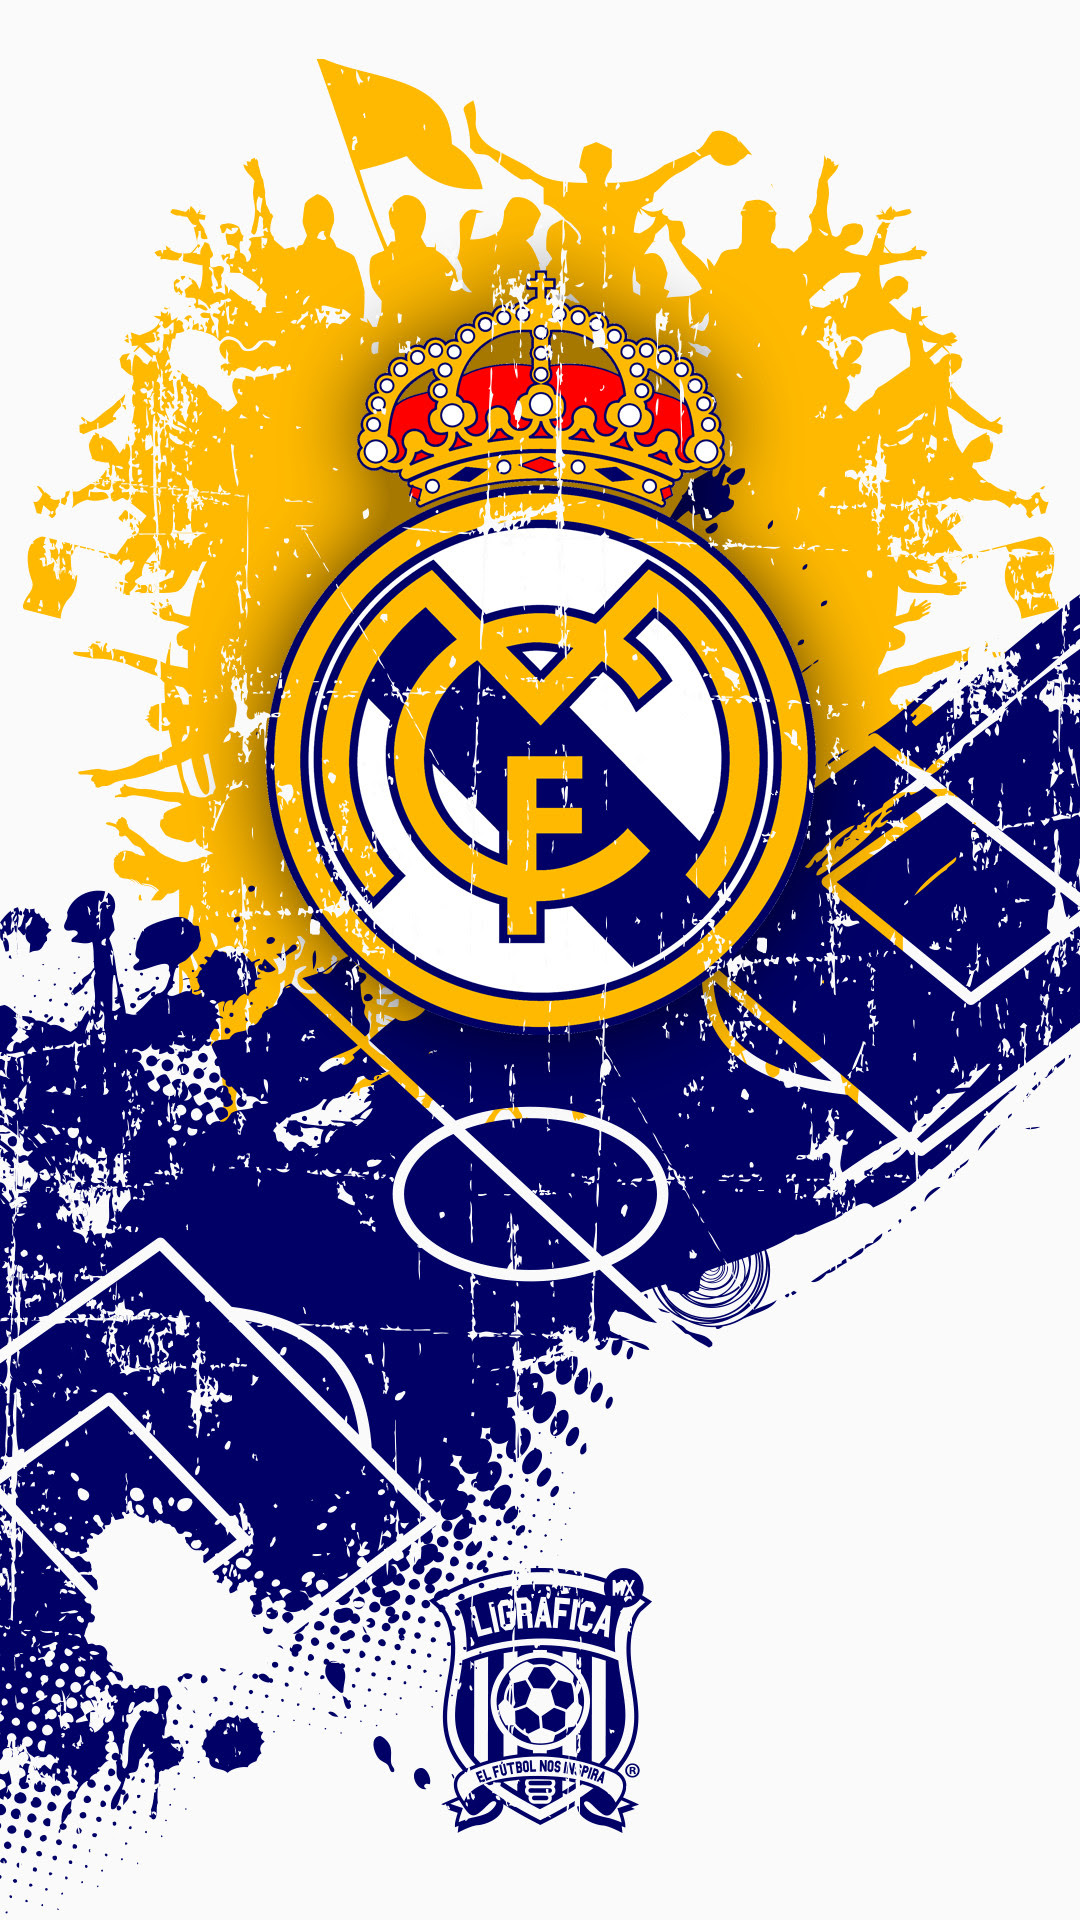 Real Madrid Logo Wallpaper 4k Apple ios 14.2 wallpapers & artworks are here, and we're happy to share this hot collection with you! real madrid logo wallpaper 4k